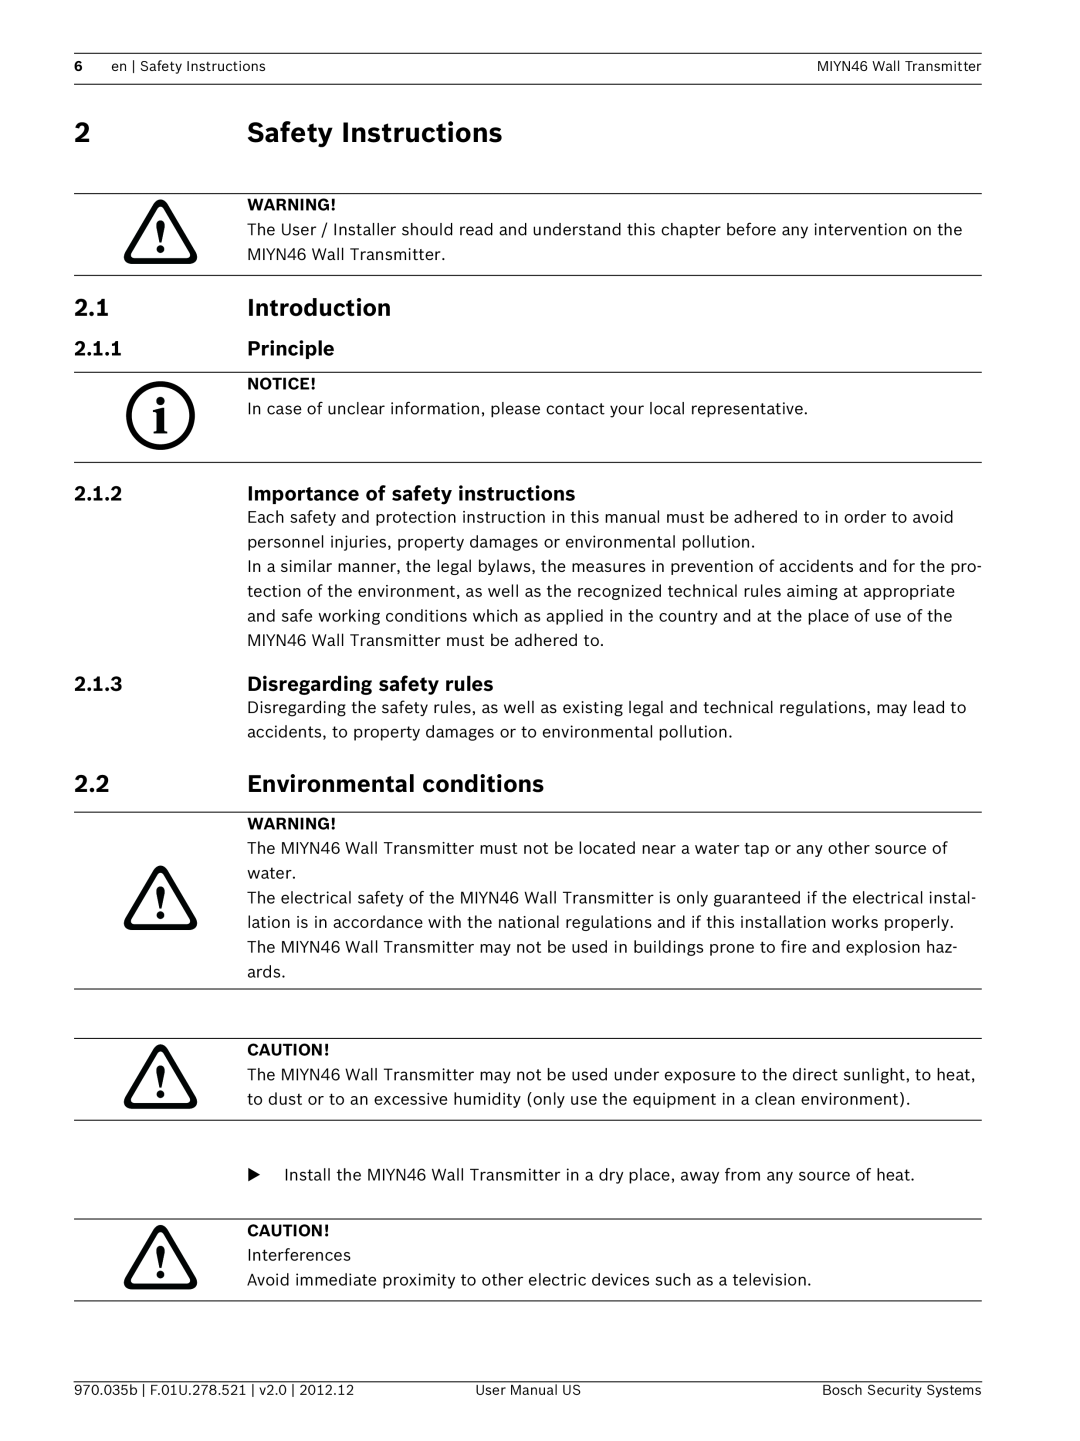 Bosch Appliances MIYN46 Safety Instructions, Introduction, Environmental conditions, 2.1.1, Principle, 2.1.2, 2.1.3 